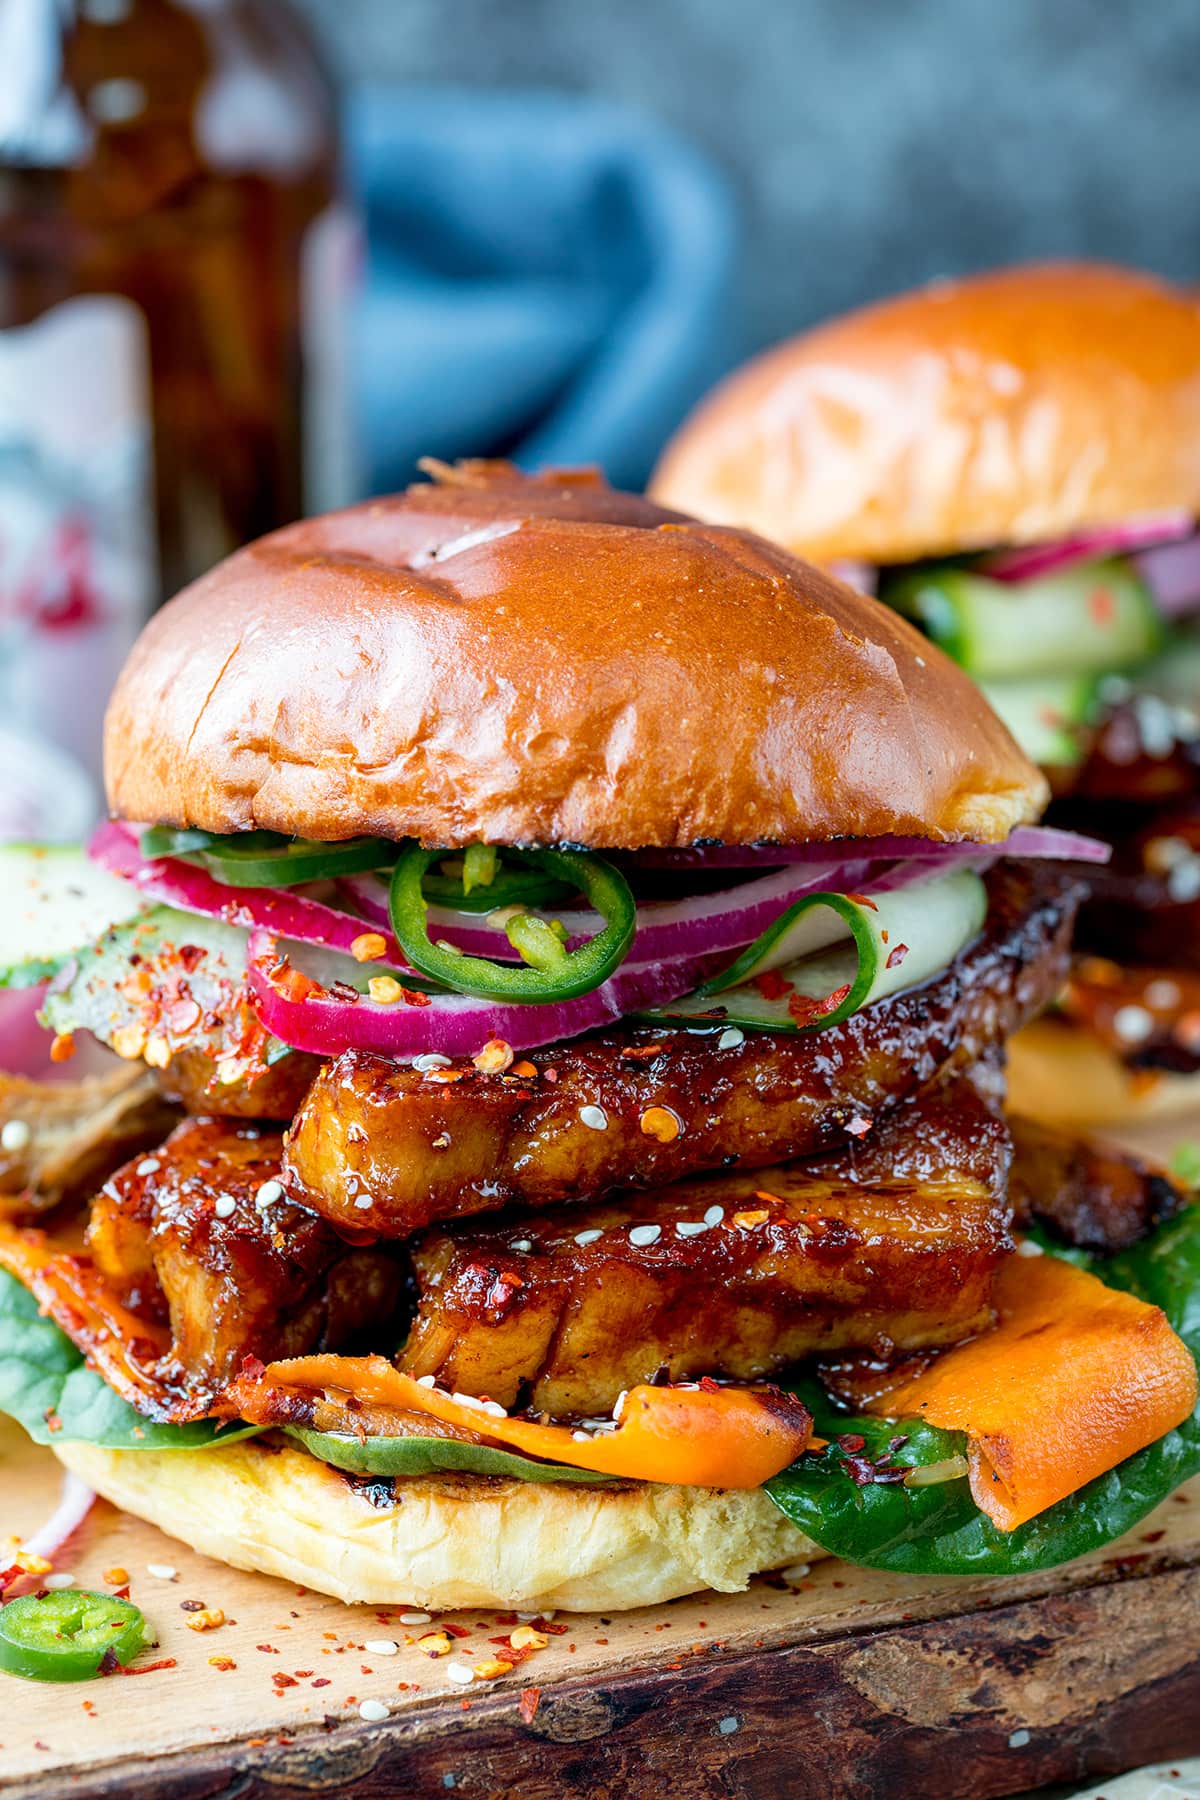 Side on image of a sticky pork belly burger with carrot, spinach, red onion and jalapeños on a brioche bun. The burger is on a wooden board and there is a further burger in the background, just in shot.